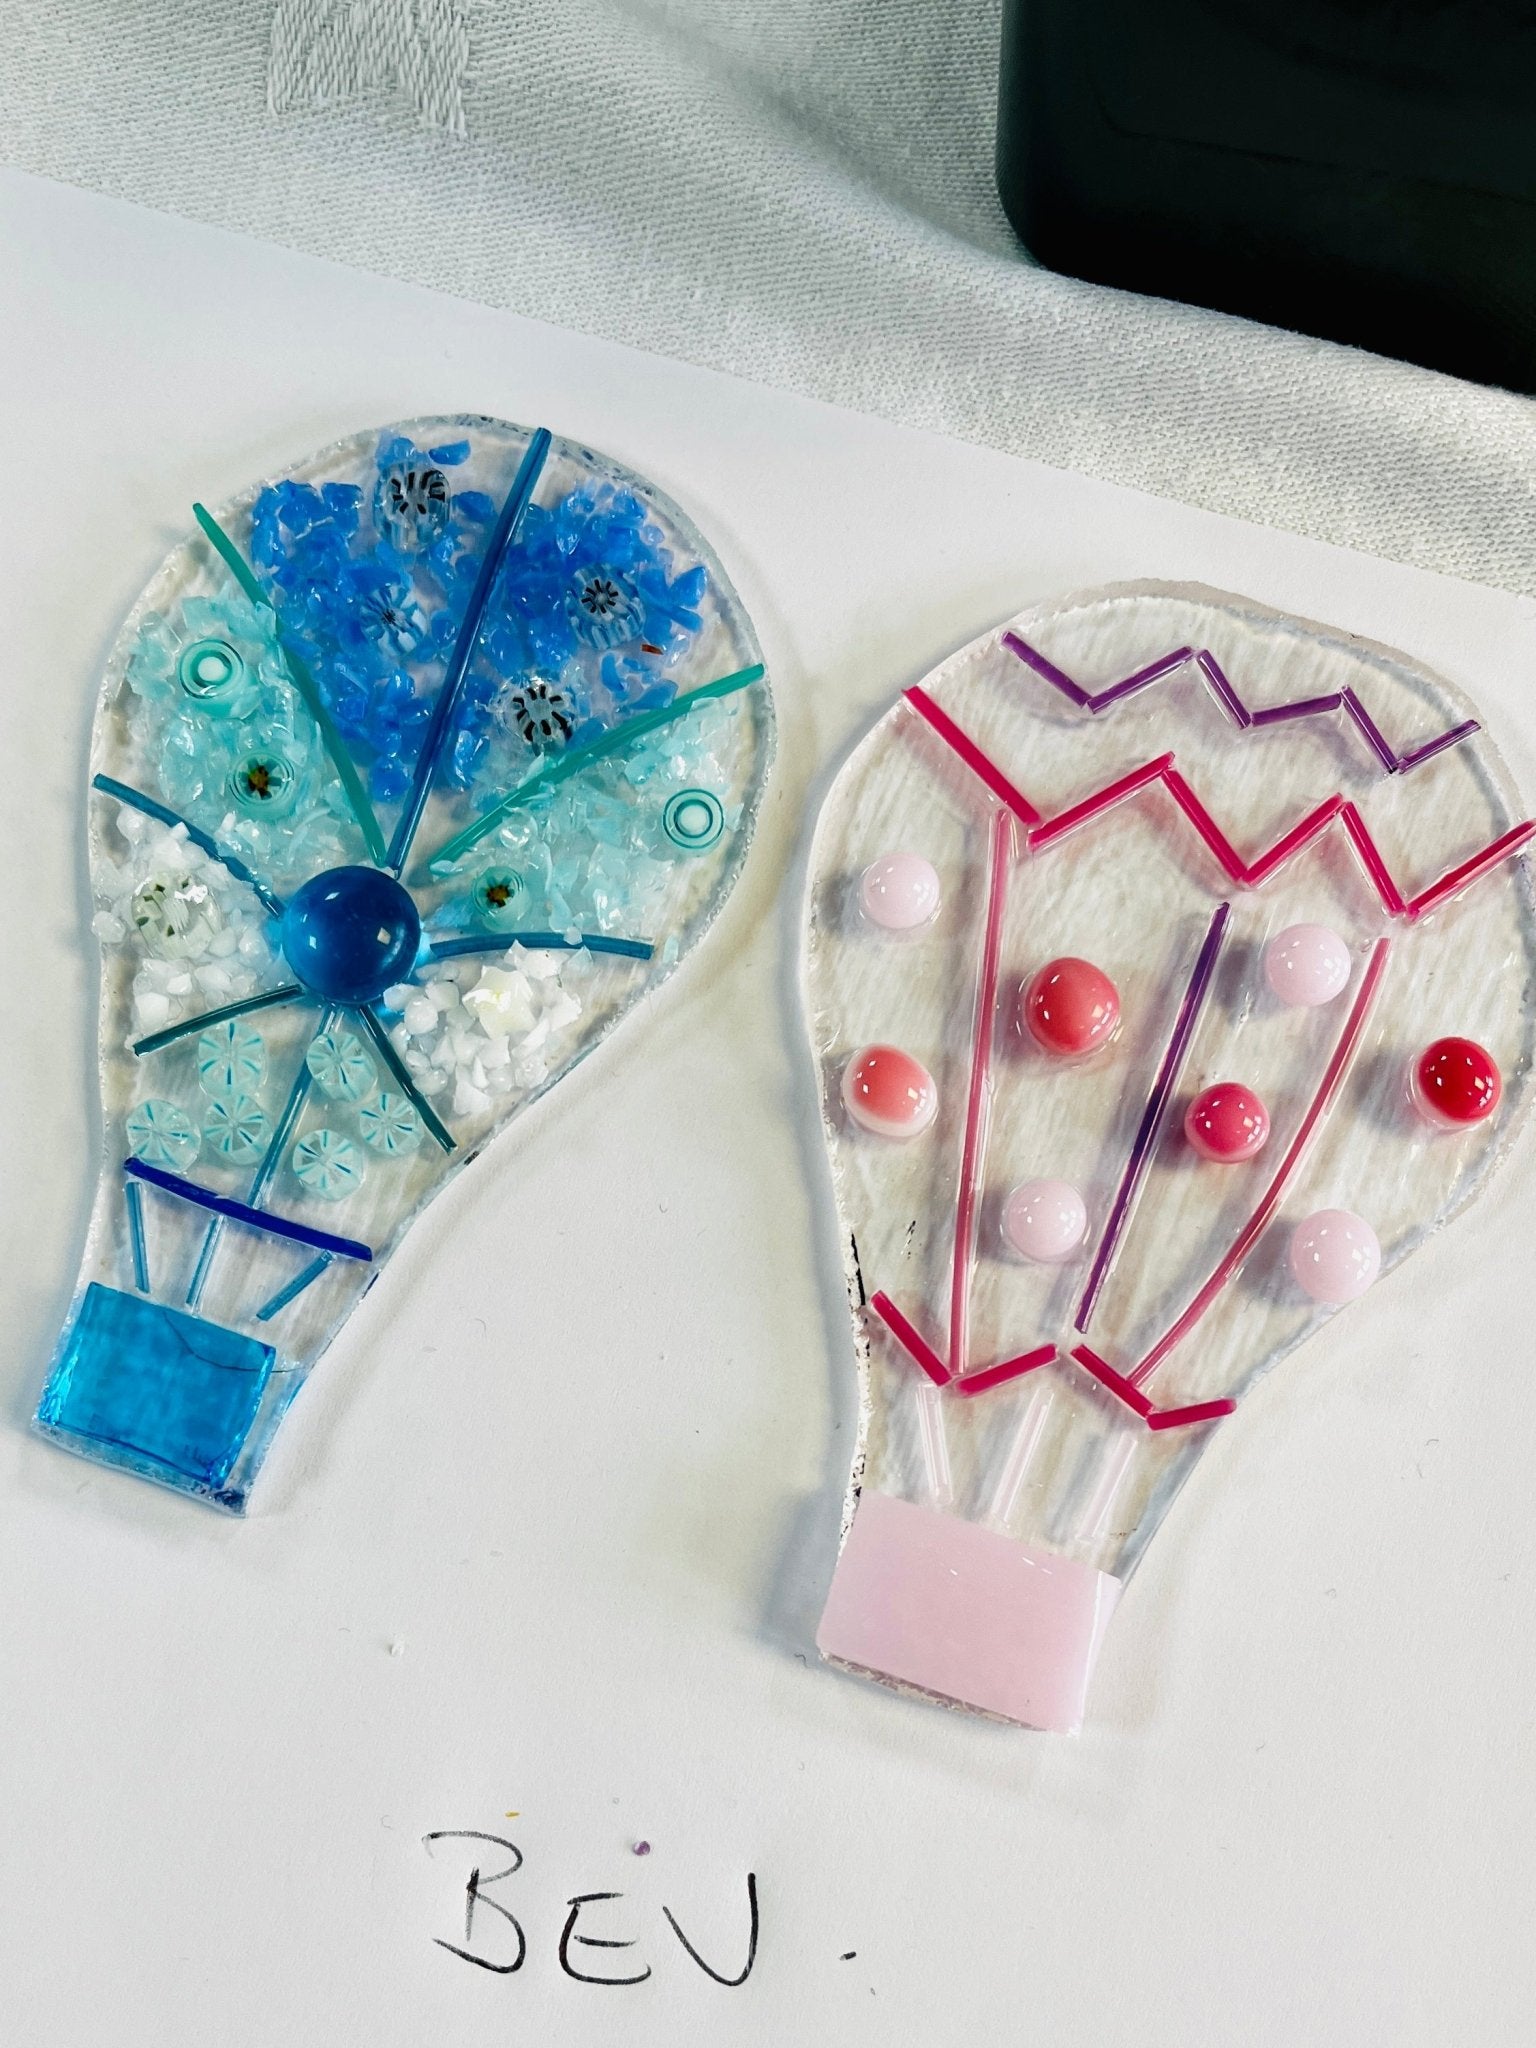 Fused glass Hot Air Balloon workshop Saturday 15th June 10.30 - 12.00 - Forever After Collective